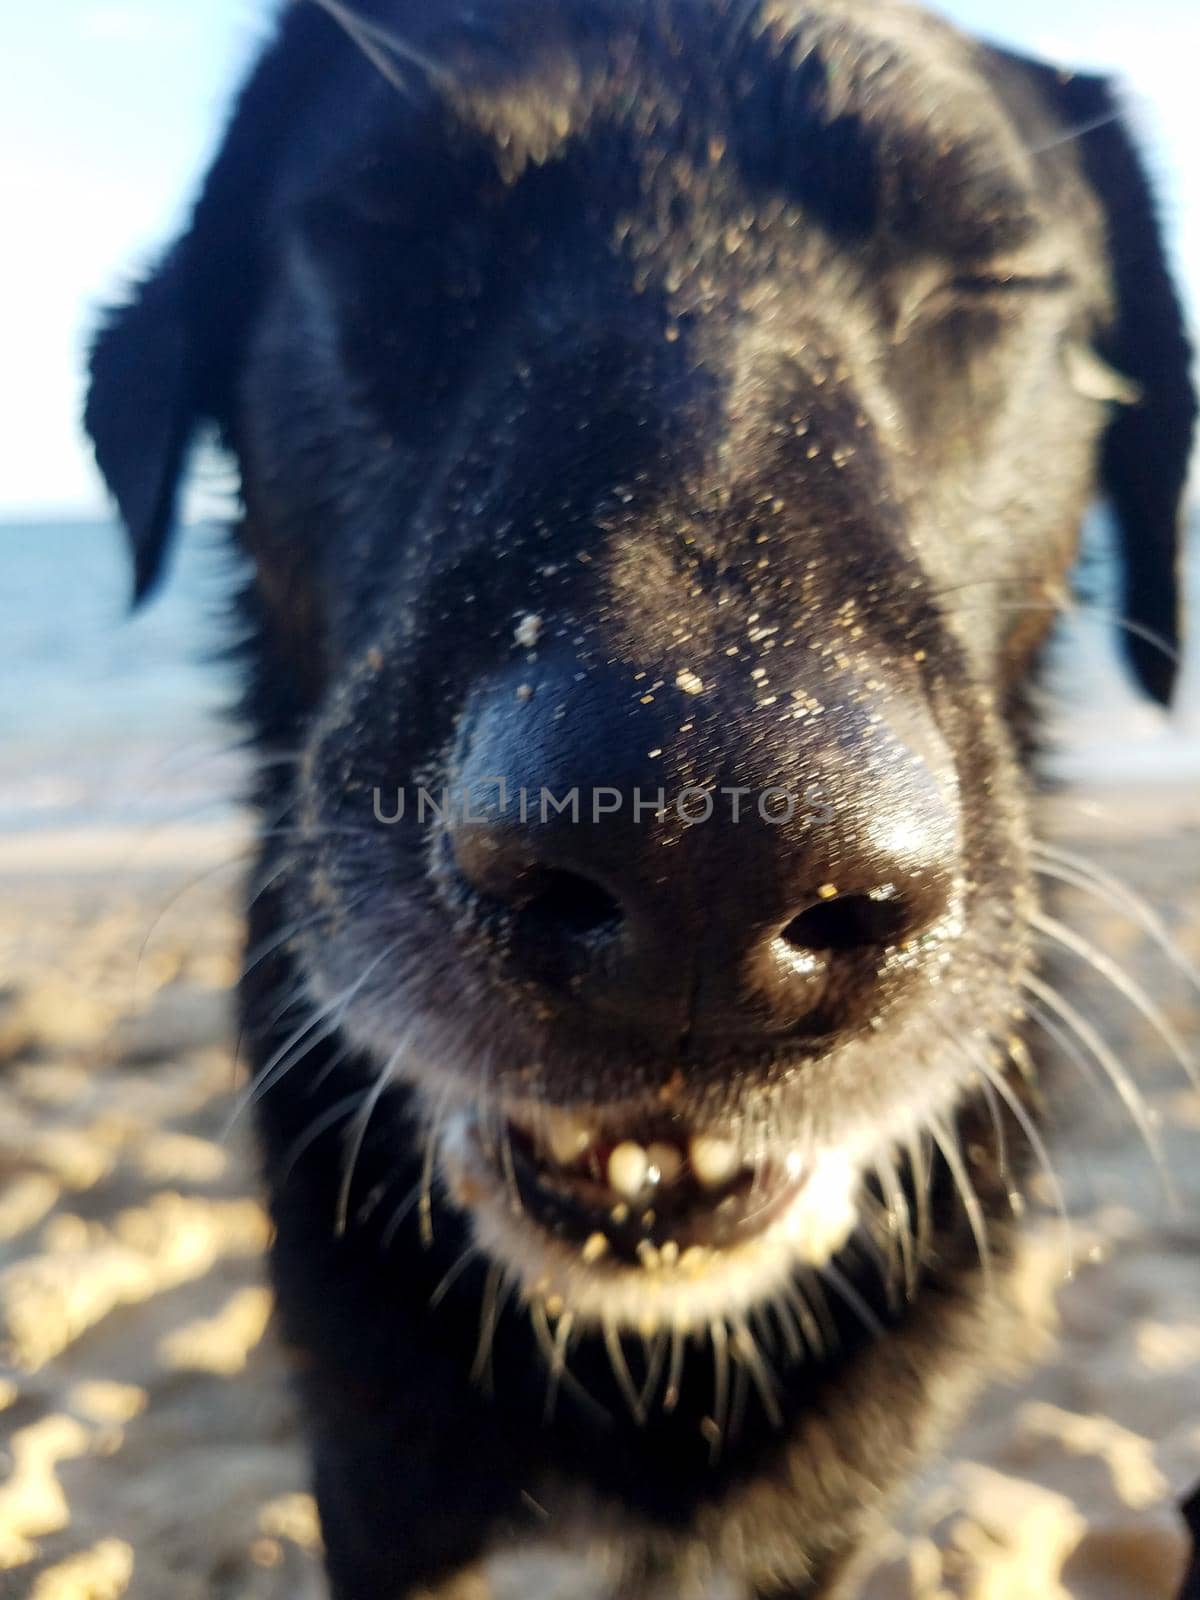 Black retriever Dog closes eyes on beach with view of Pacific ocean off coast of Oahu, Hawaii.